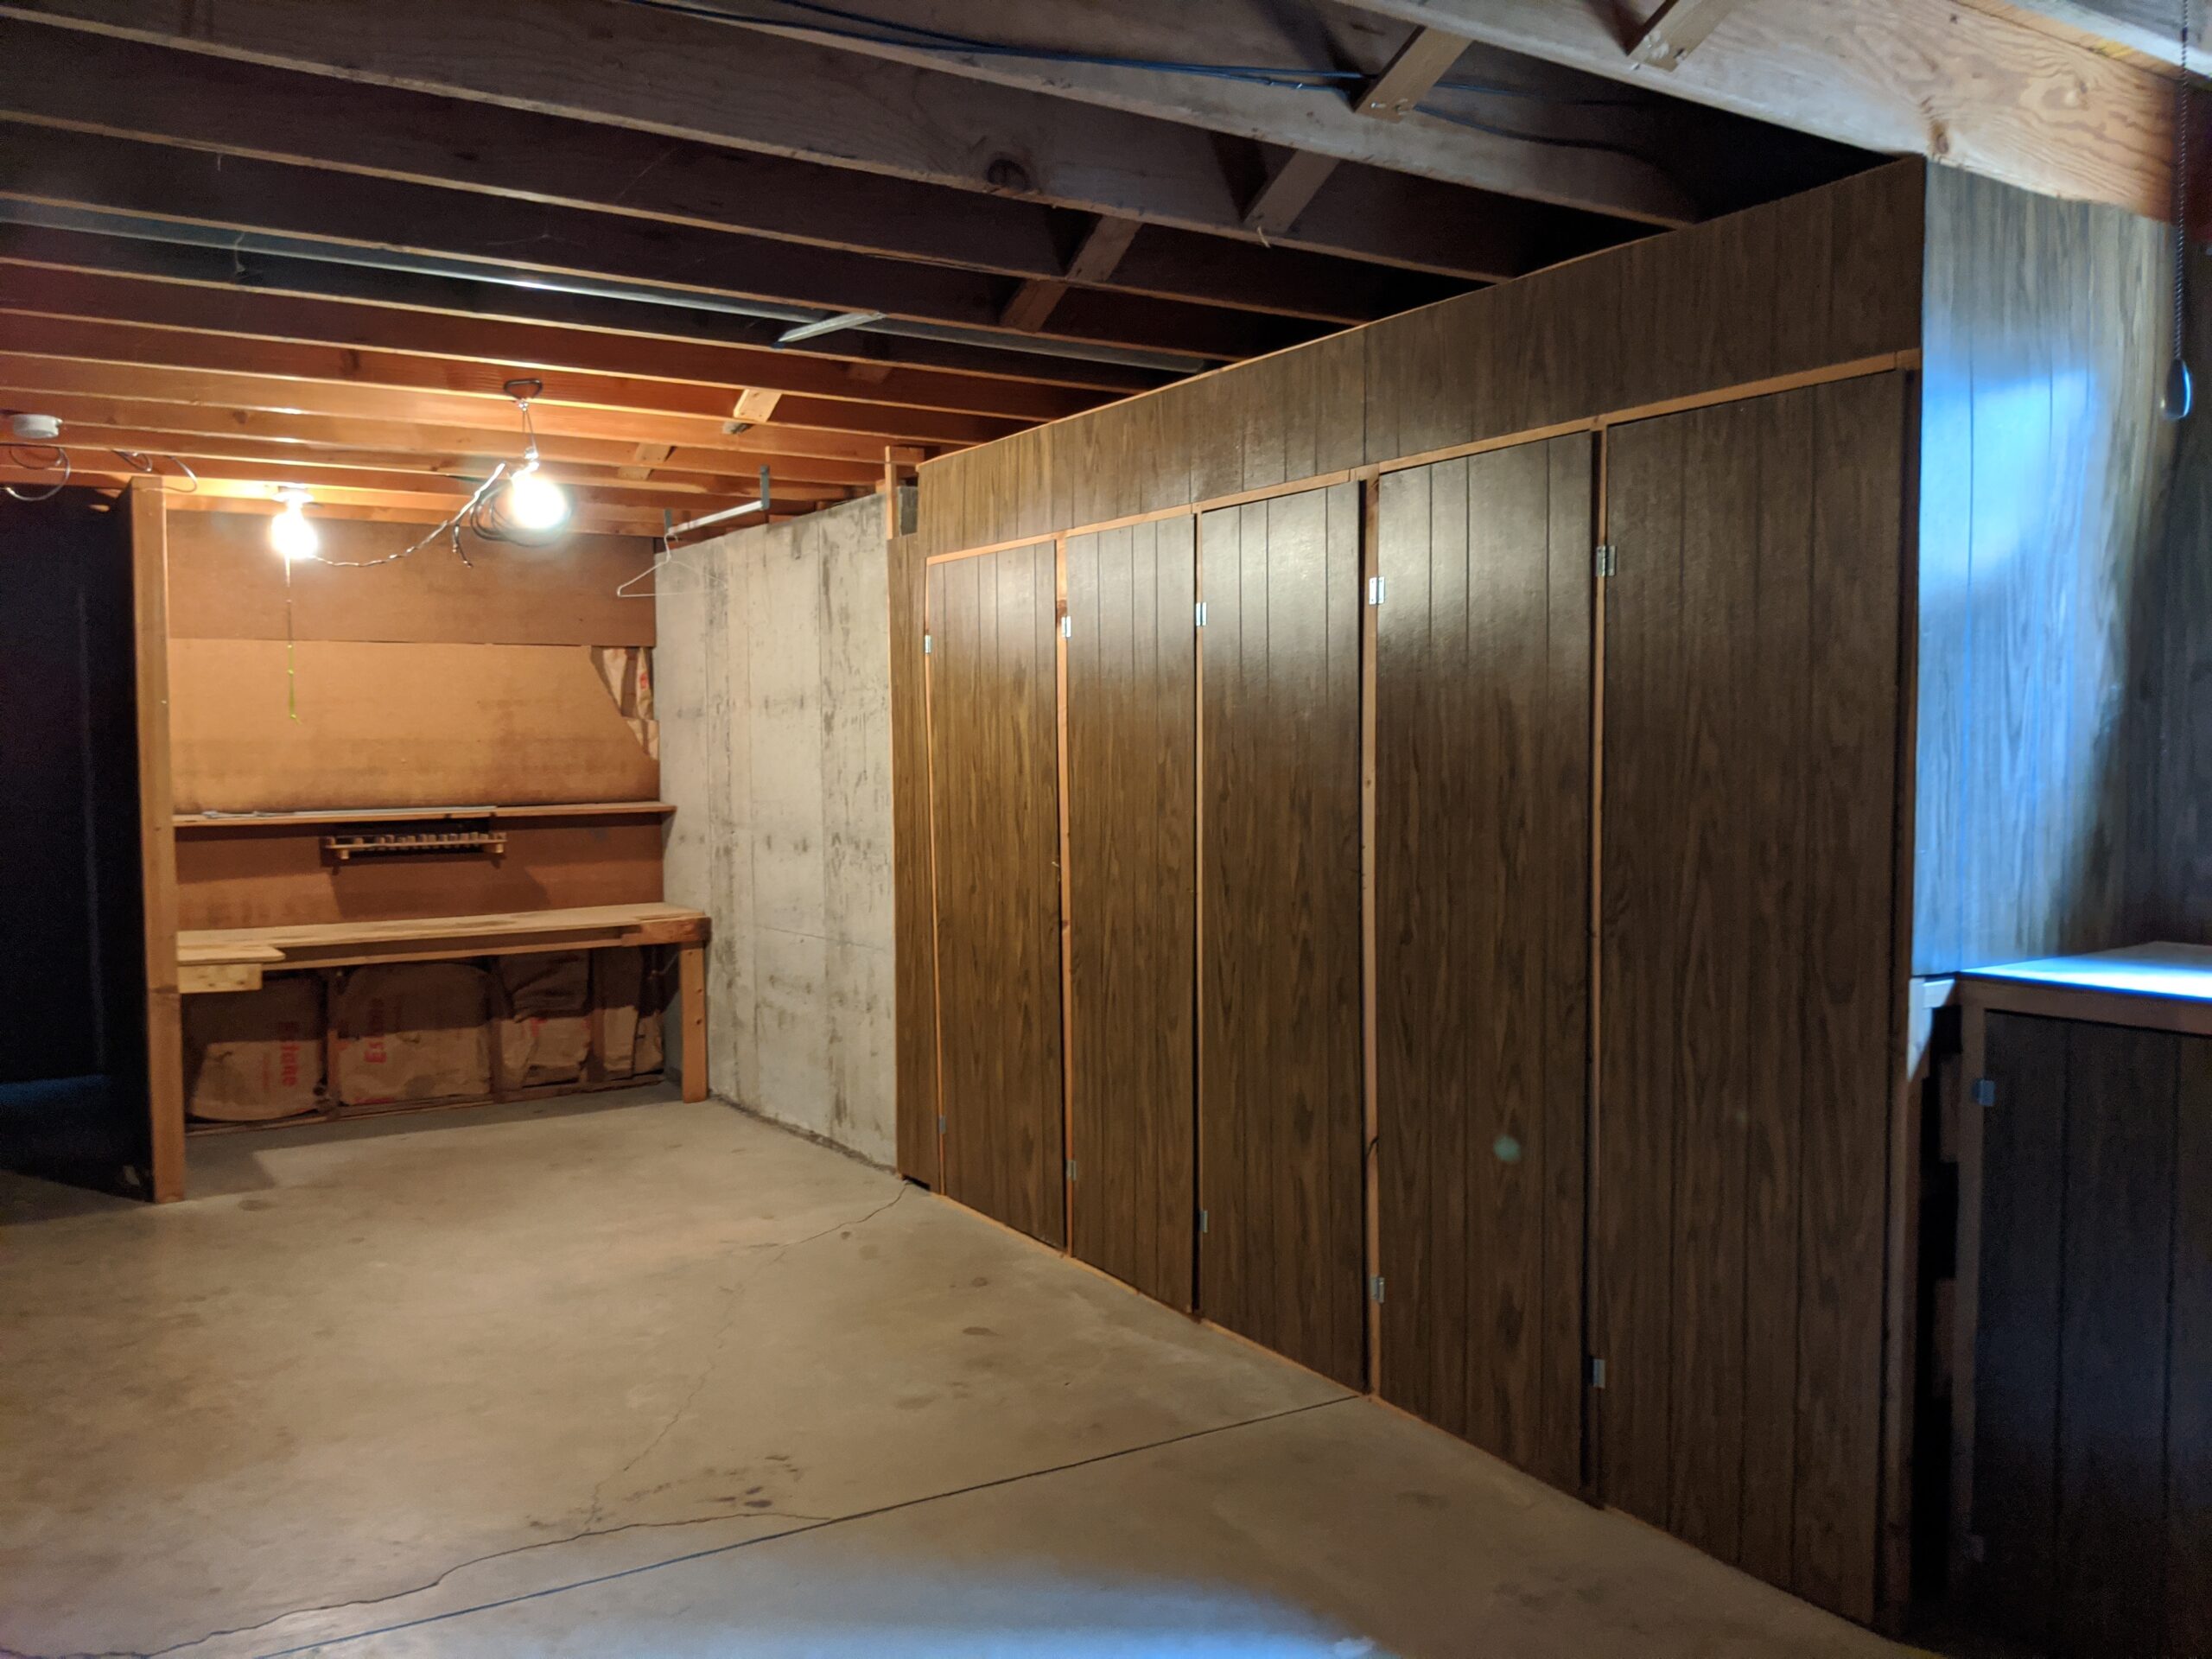 The previous owners built these functional cabinets and workbench but we removed them on our second day. We plan to gut this basement to the foundation walls, so we can rebuild it as a cozy living space.